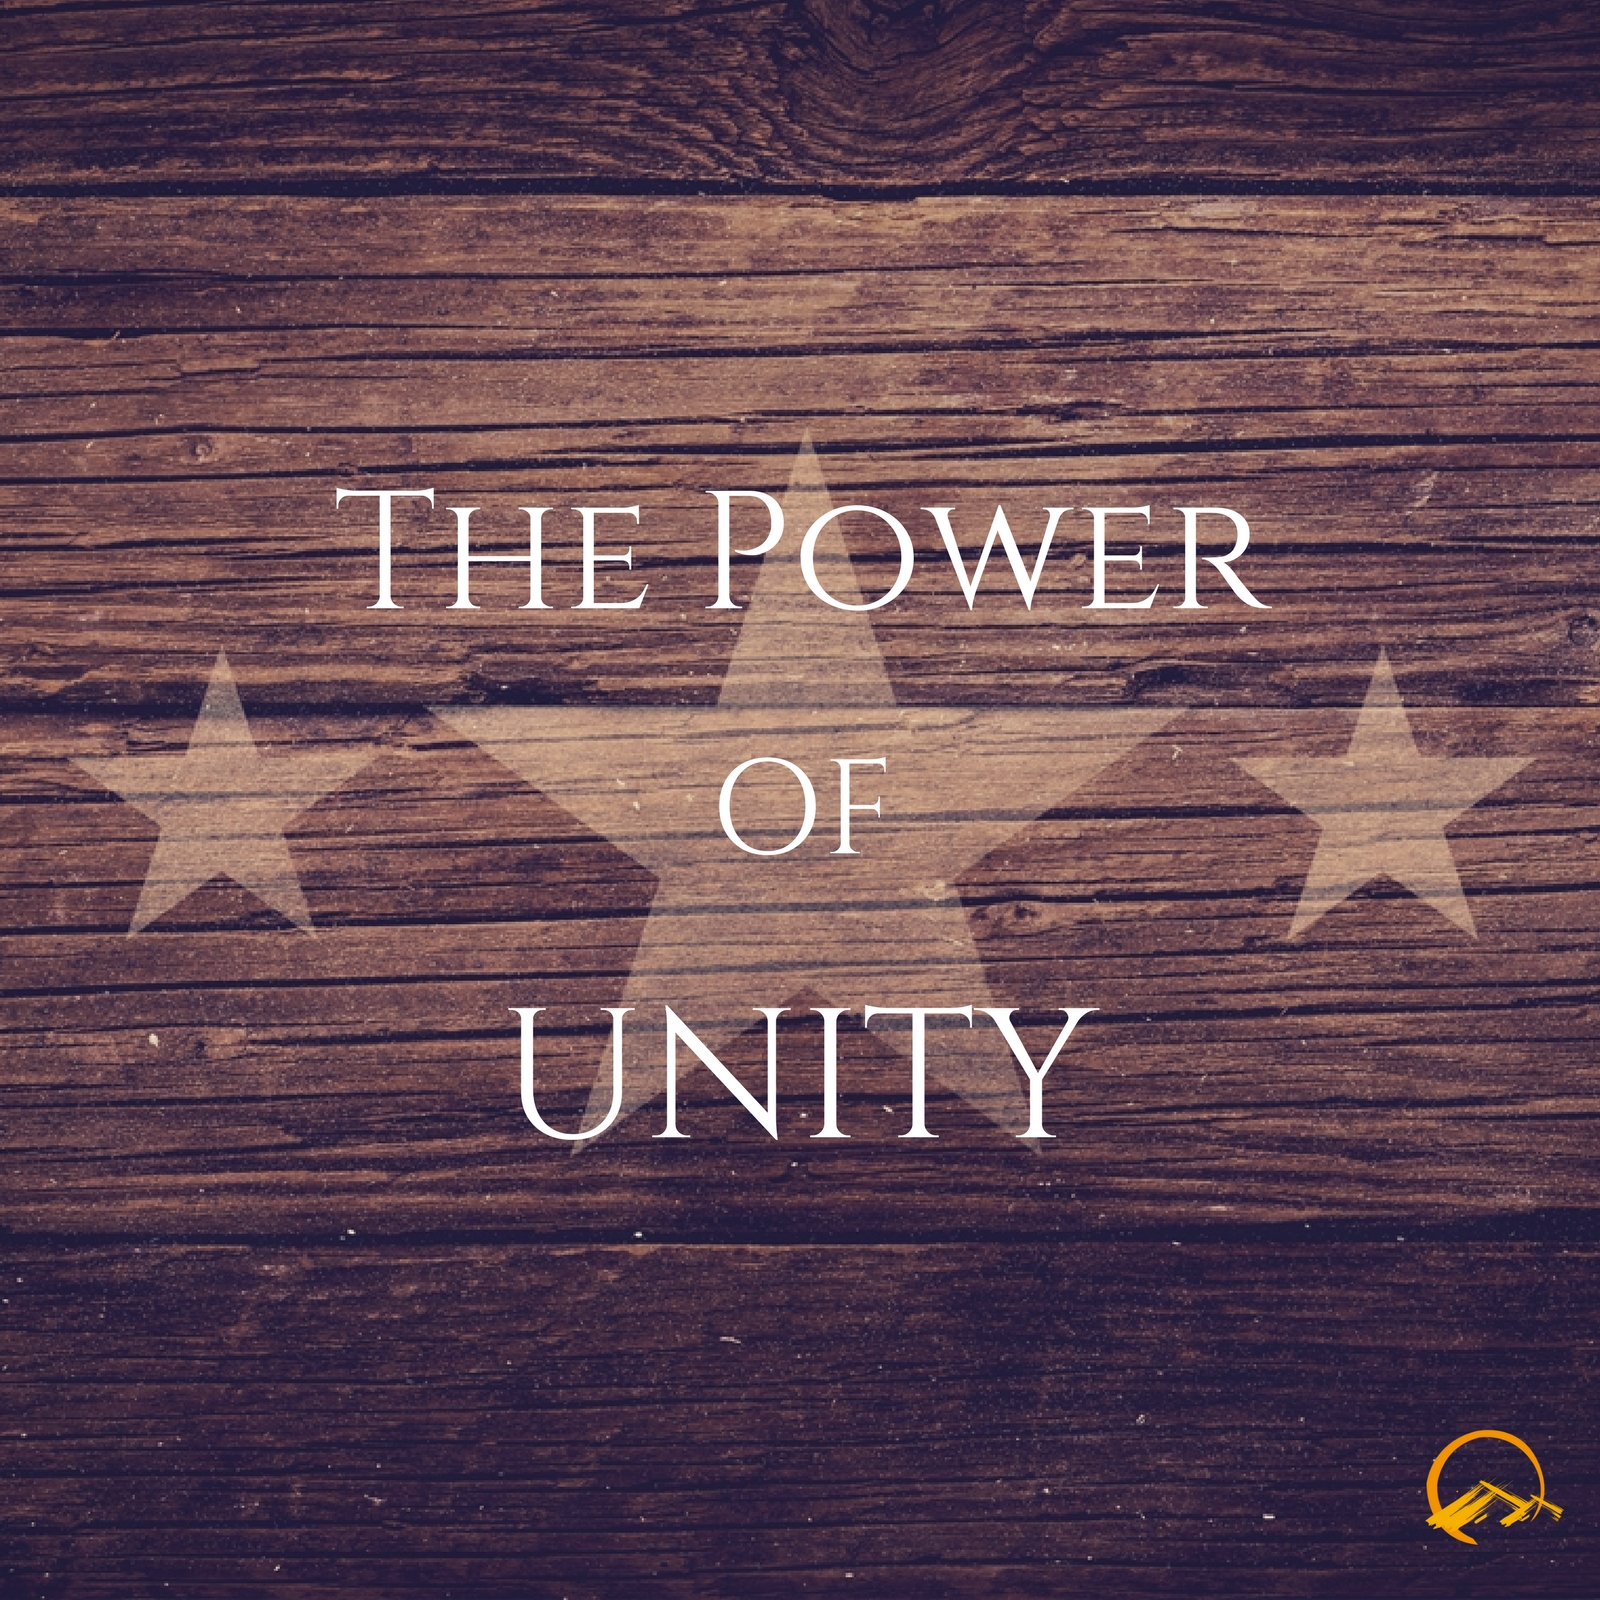 The Power of Unity